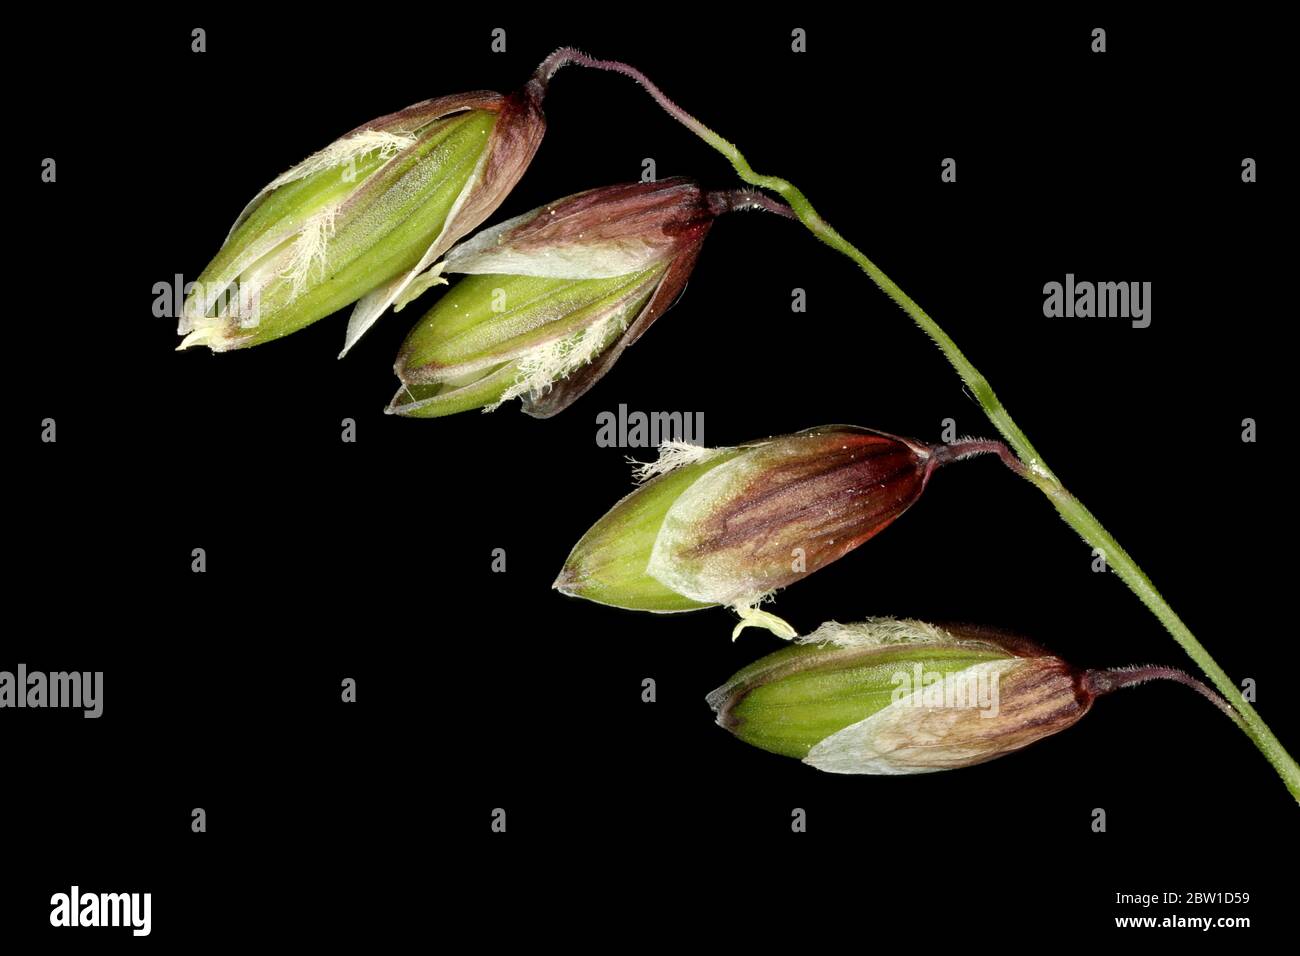 Mountain Melick (Melica nutans). Groups of Spikelets Closeup Stock Photo